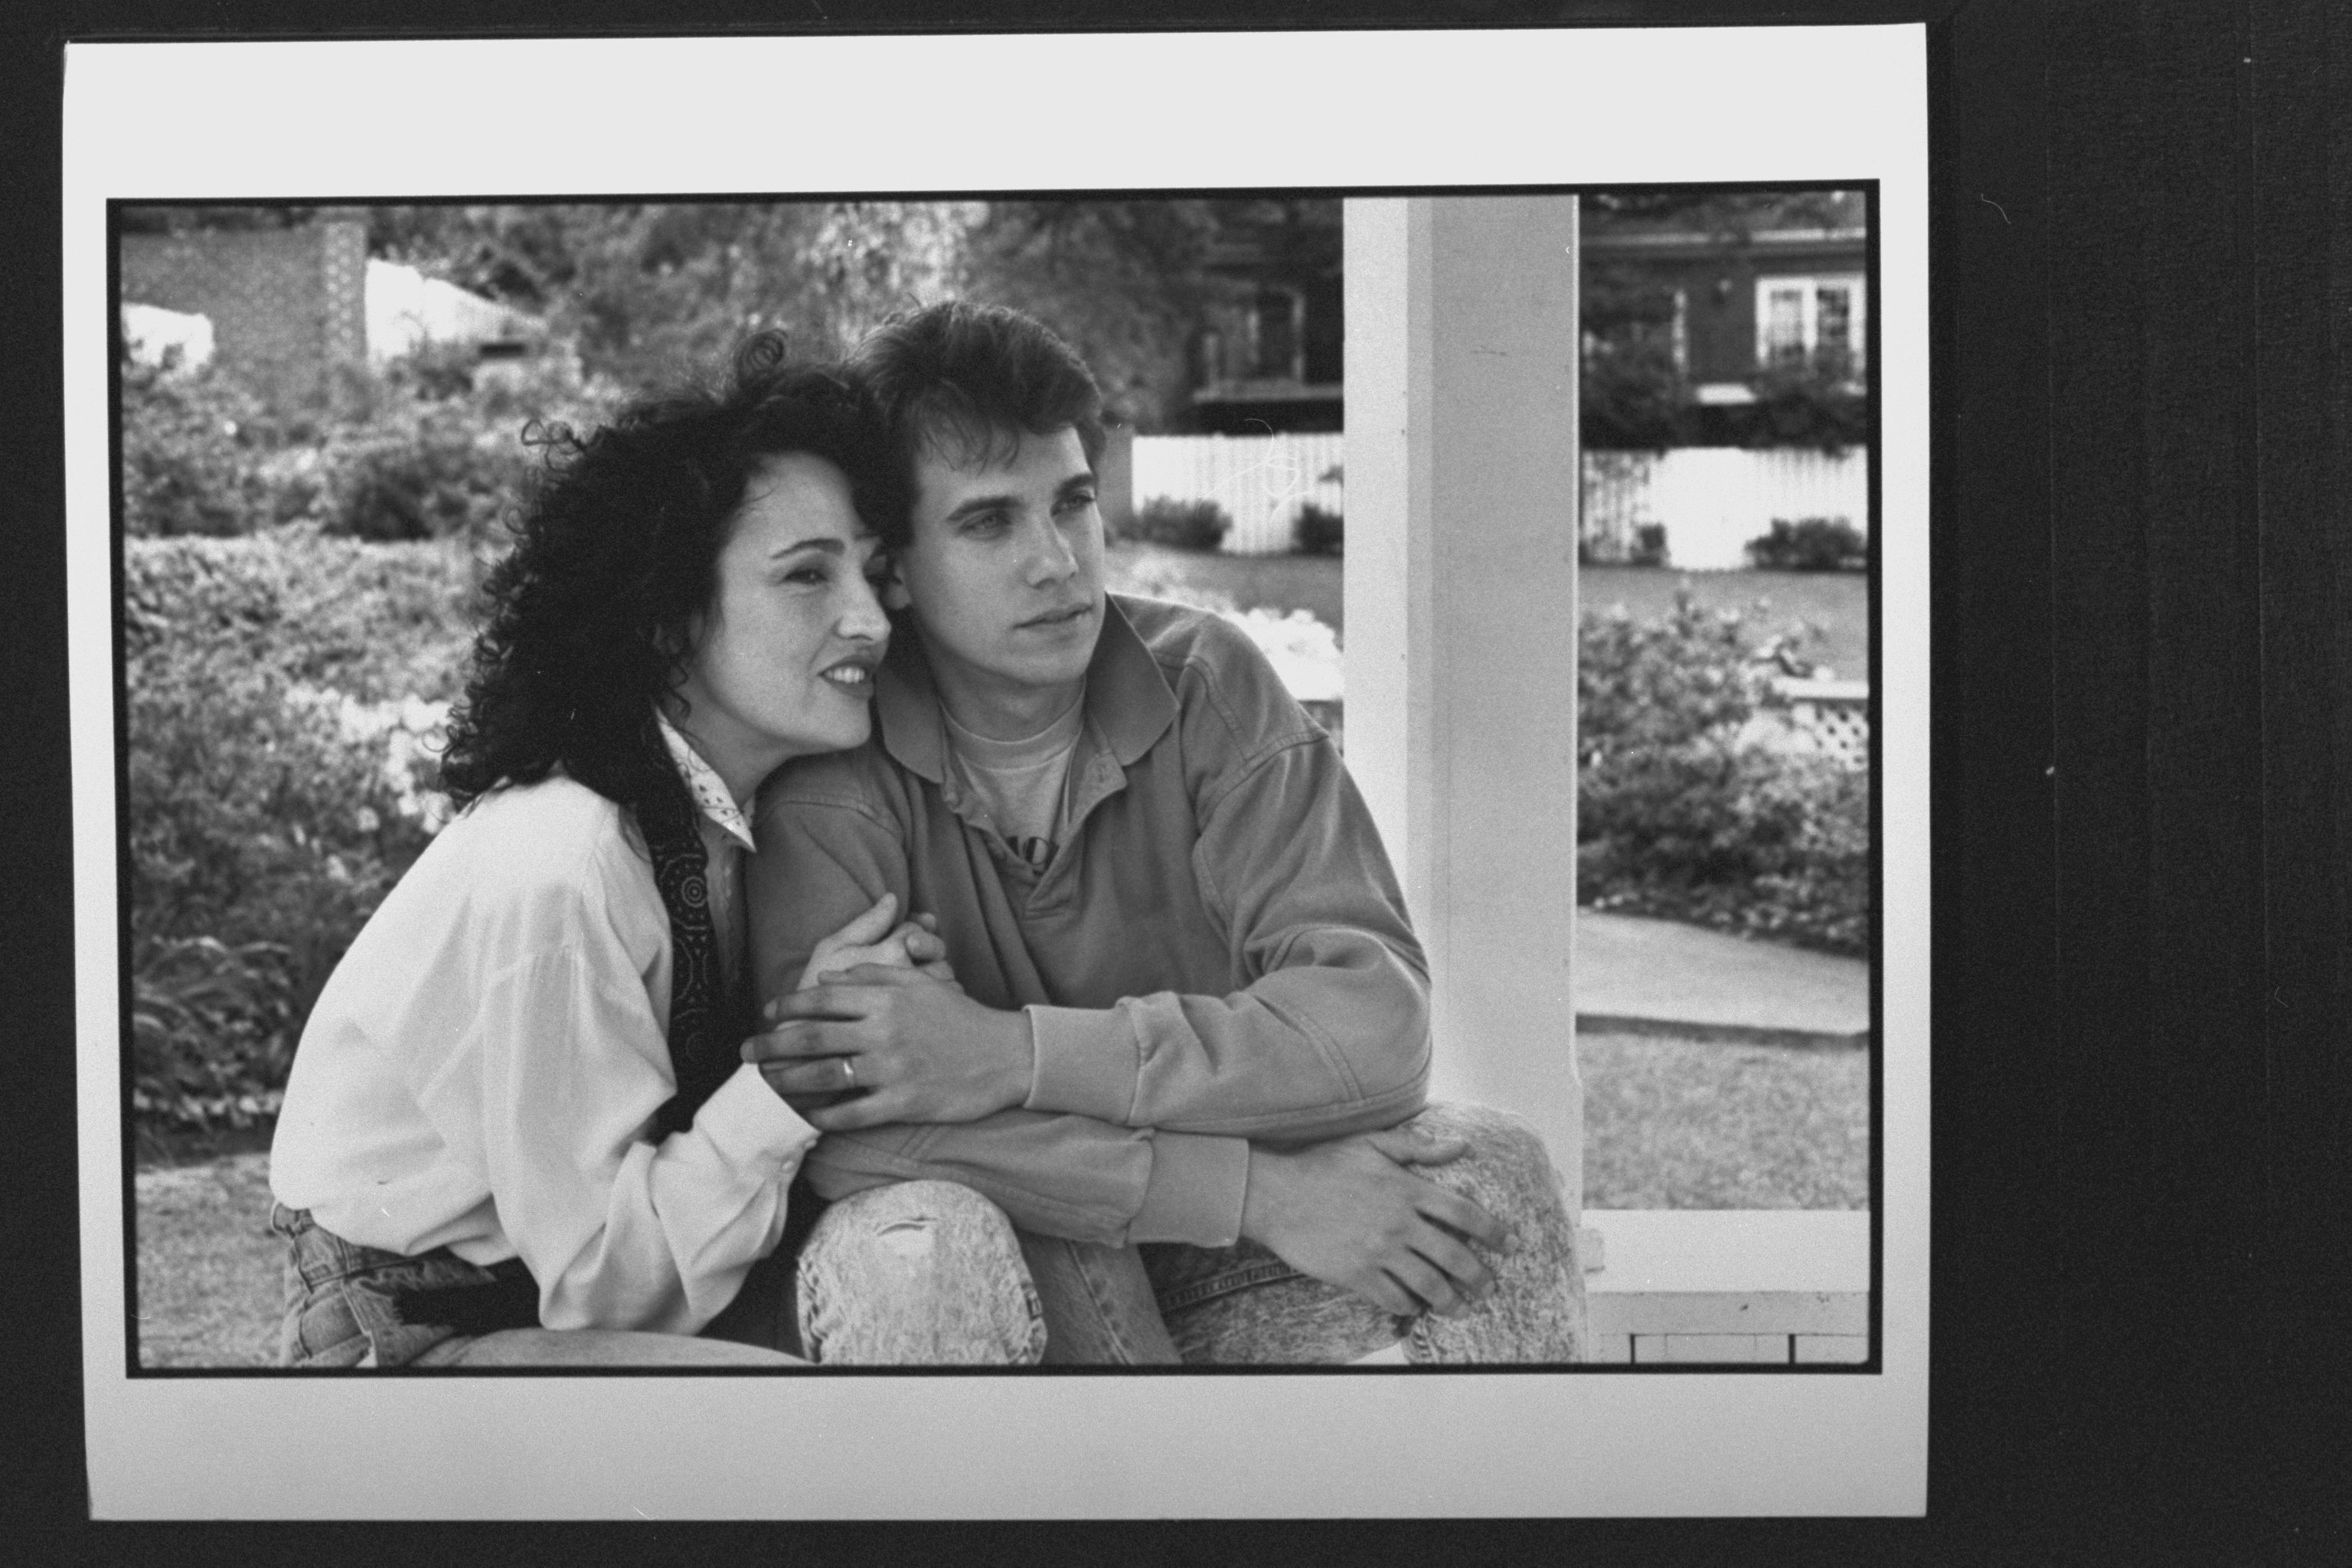 Robby Benson and his wife Karla DeVito, on porch of their home on April 10, 1990 | Source: Getty Images